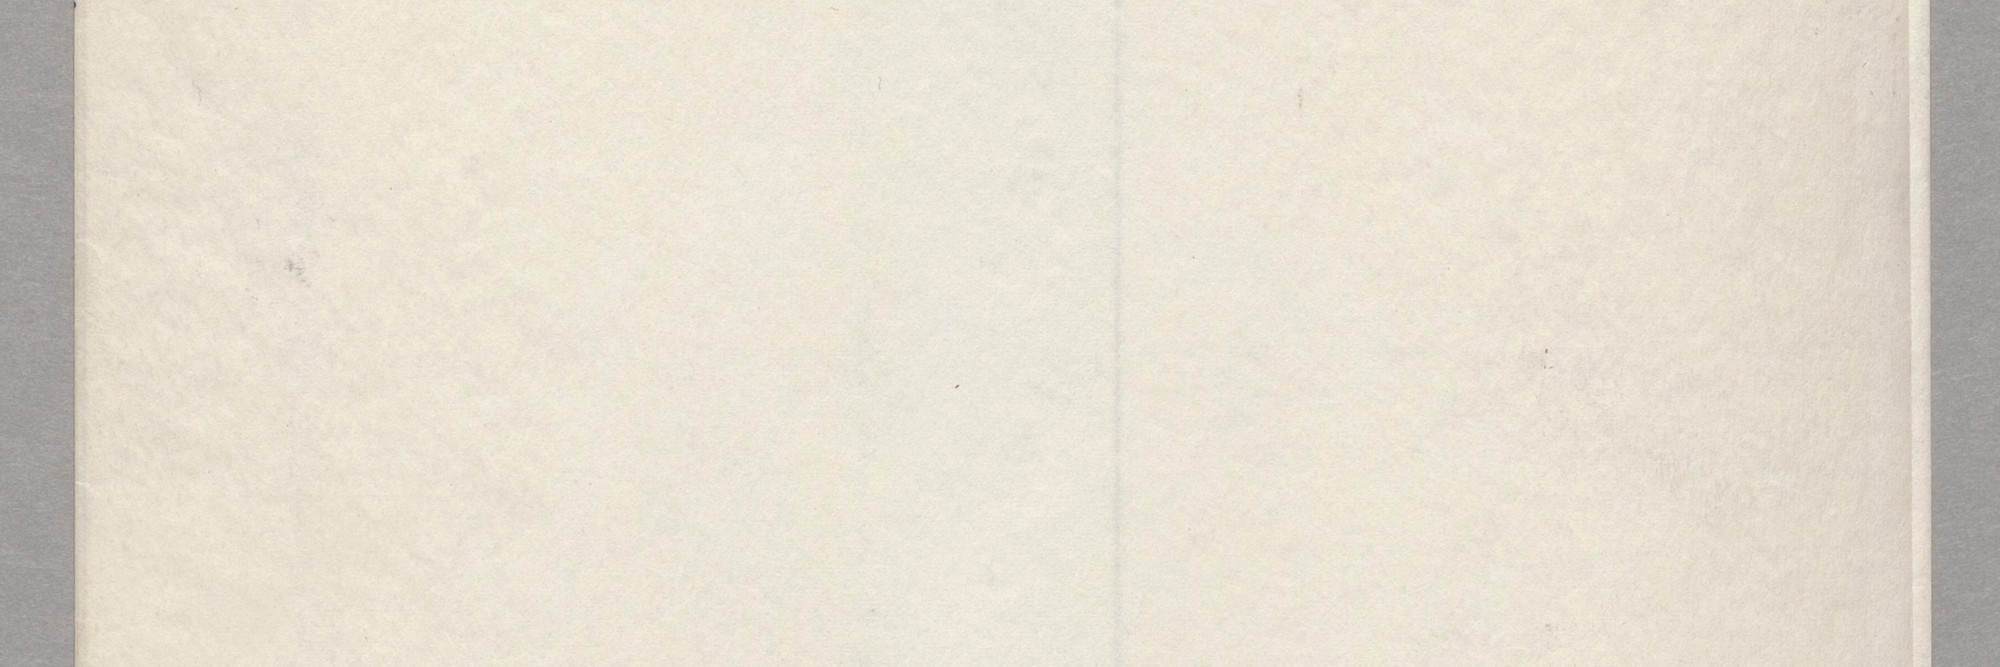 John Cage. 4′33″ (In Proportional Notation). 1952/53. Ink on paper, each page: 11 × 8 1/2″ (27.9 × 21.6 cm). The Museum of Modern Art, New York. Acquired through the generosity of Henry Kravis in honor of Marie-Josée Kravis, 2012. © 2013 John Cage Trust